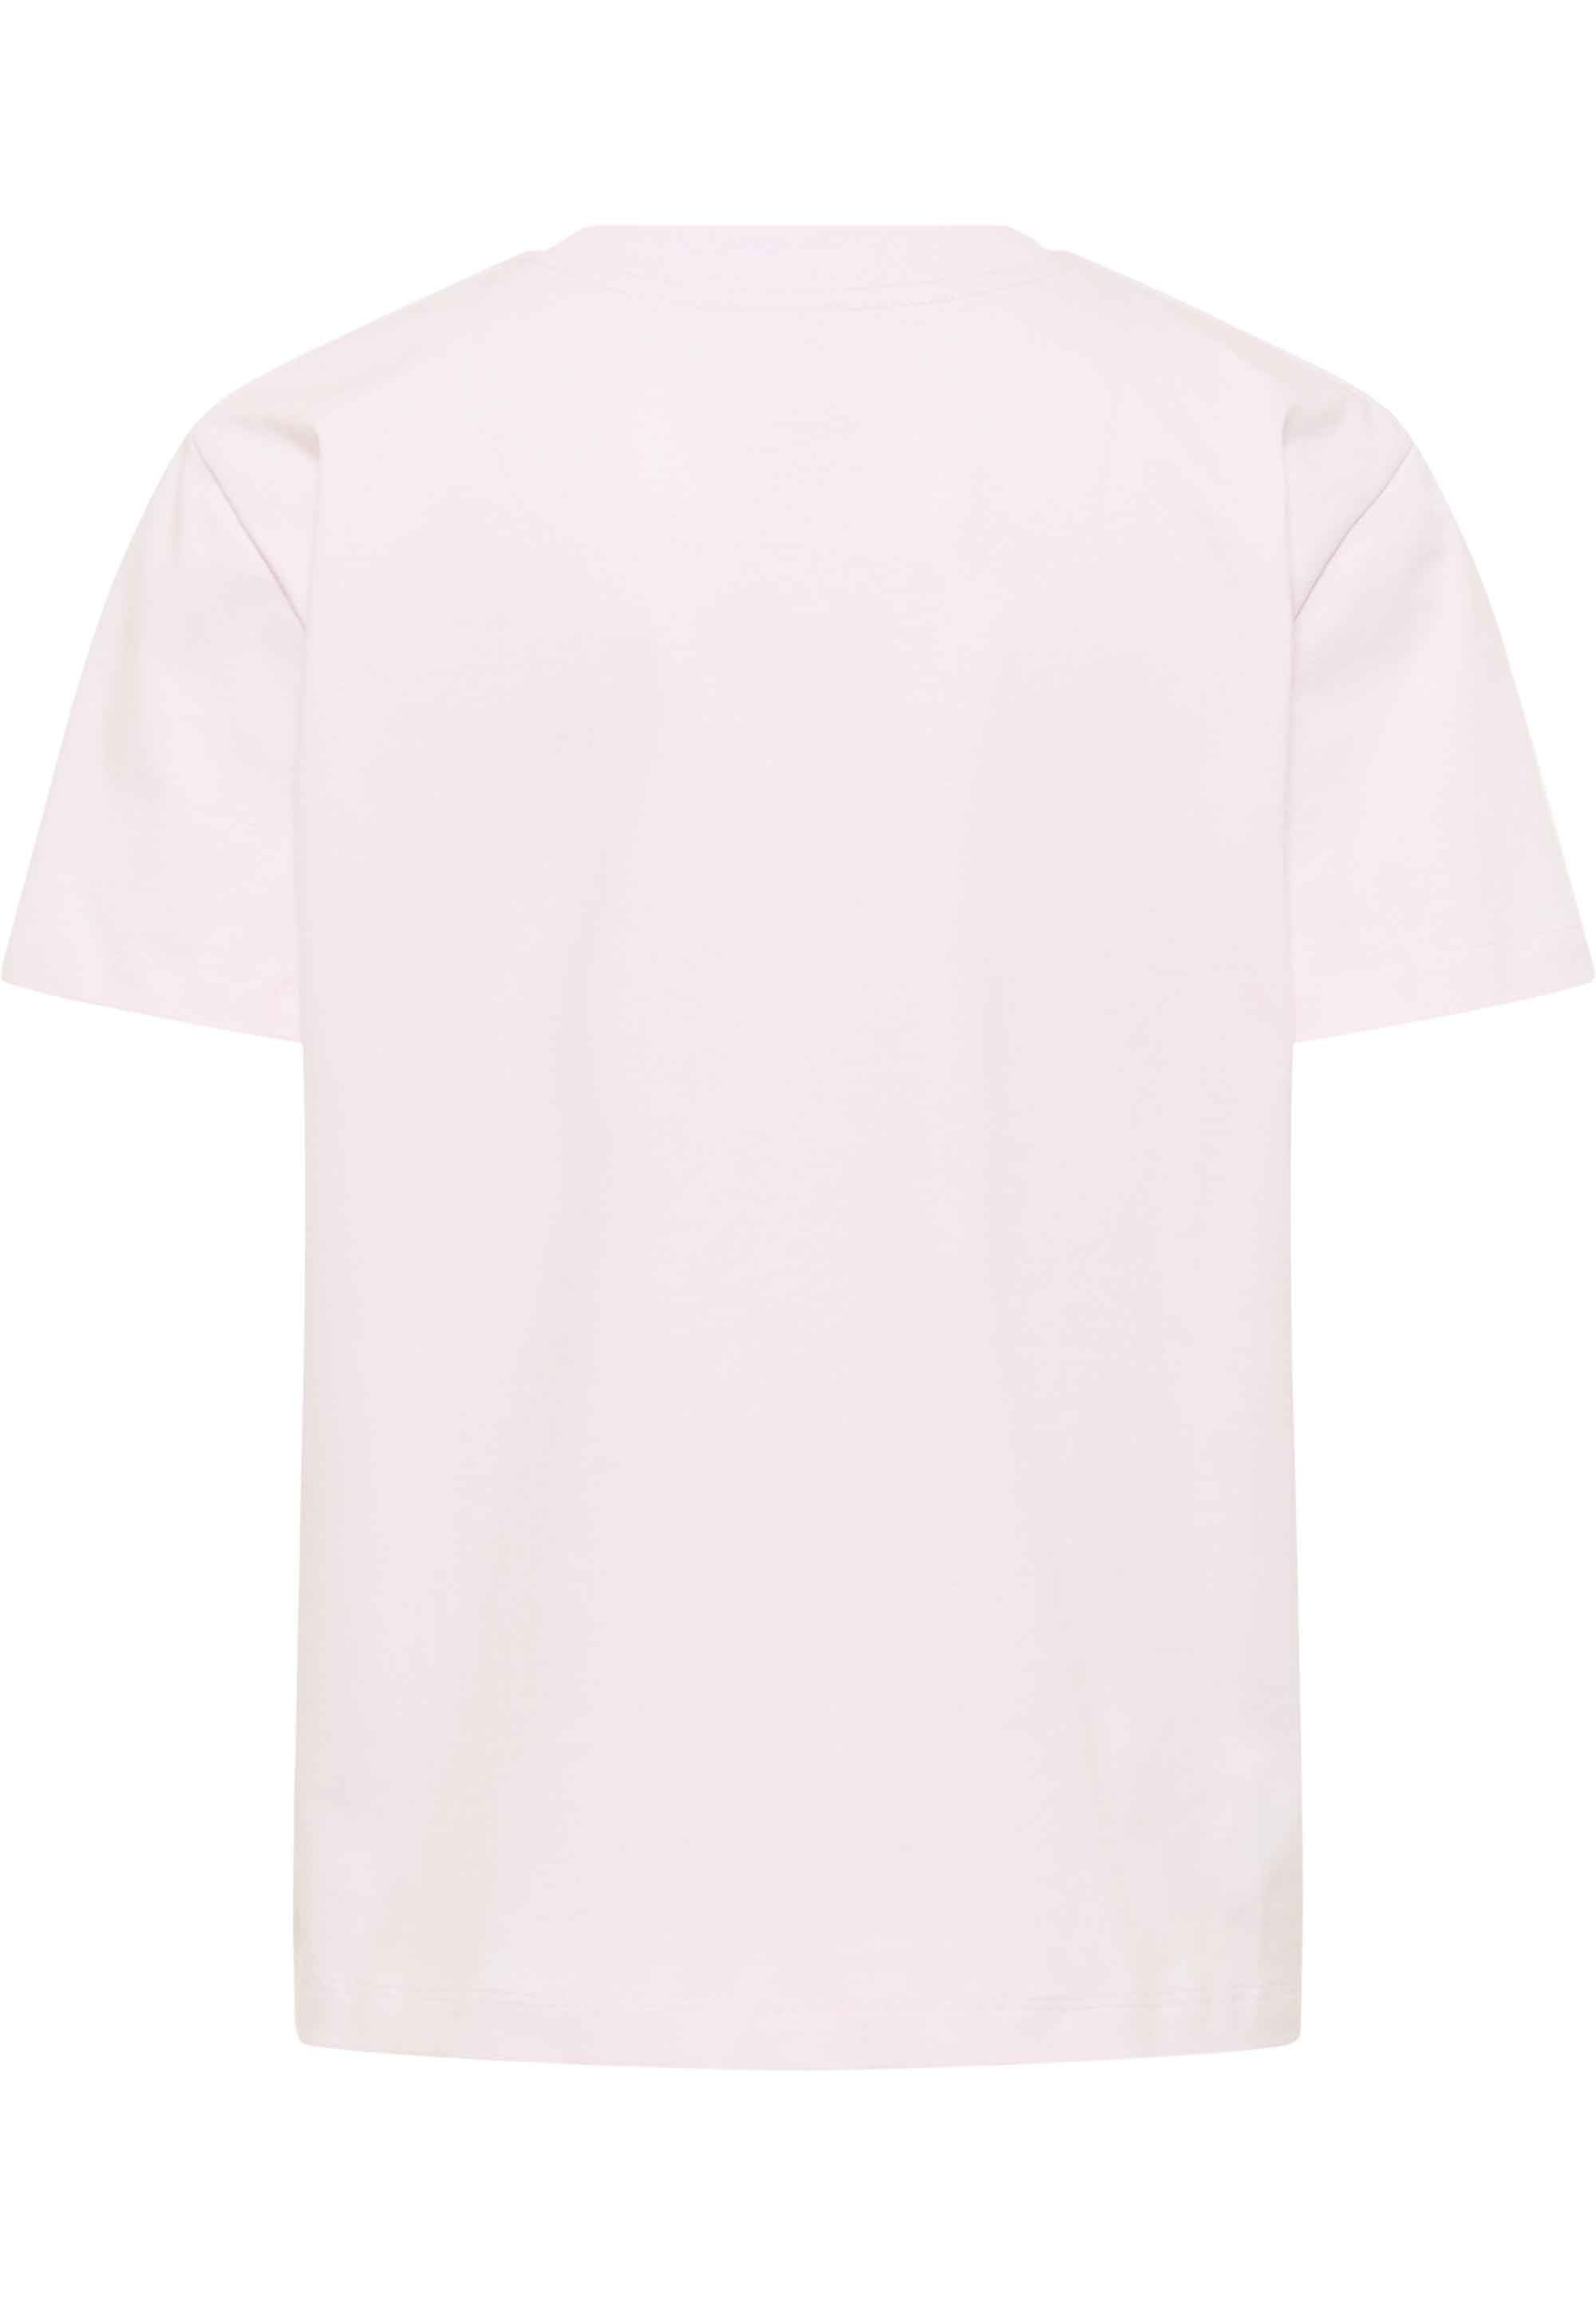 SOMWR TAPER T-Shirt PUR001